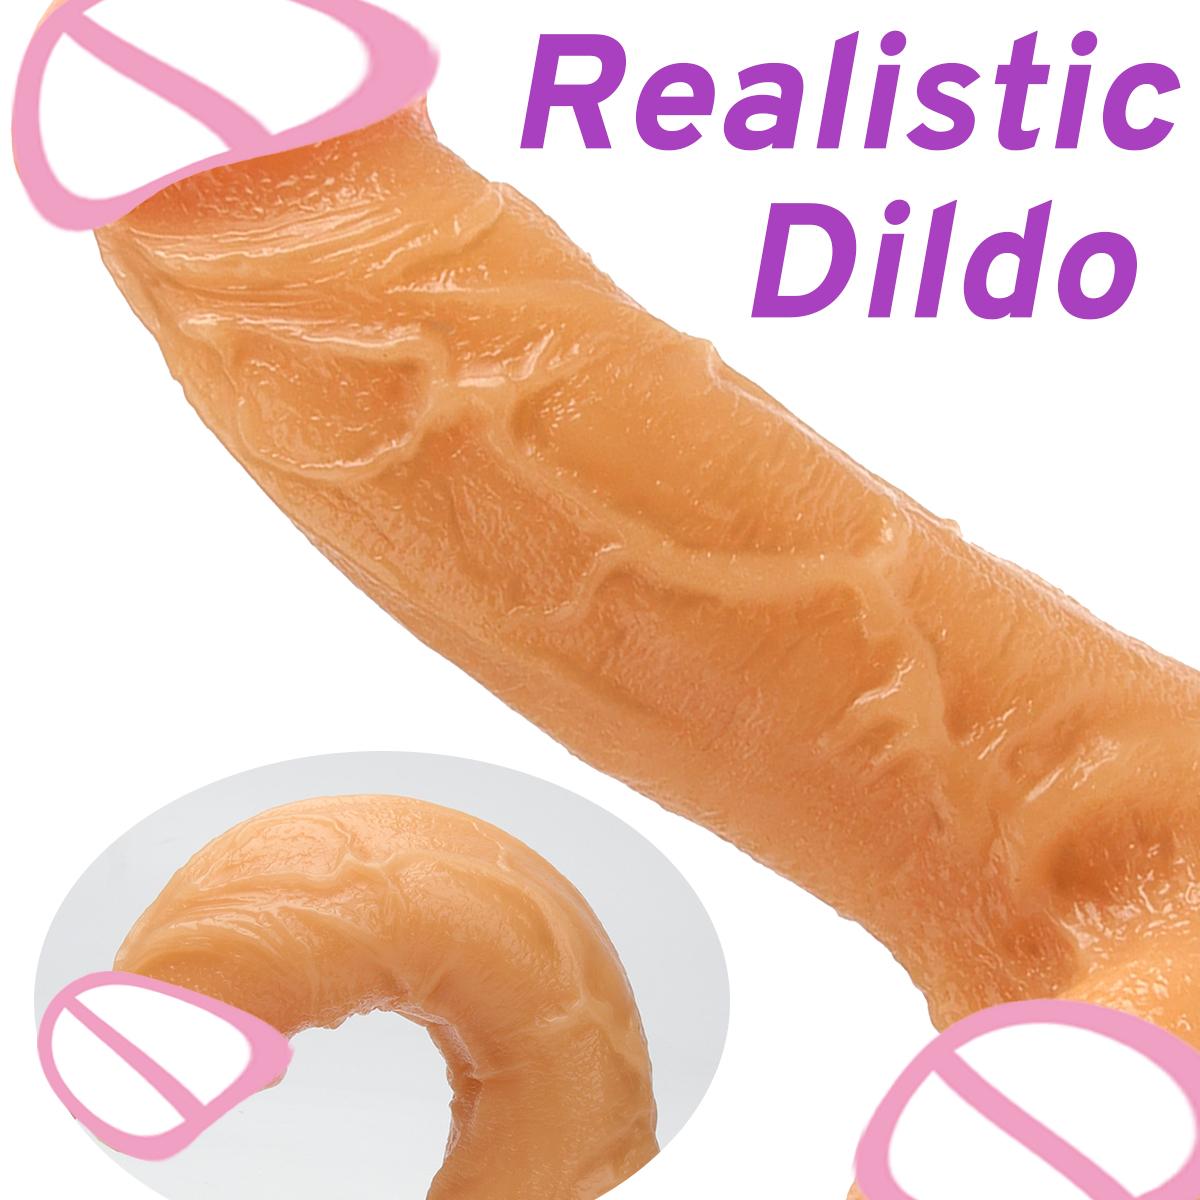 Fat Dick Dildo Penis Sex Toy,Super Realistic Artificial Penis Dildo Clitoral Stimulation With Suction Cup For Women Sex Product